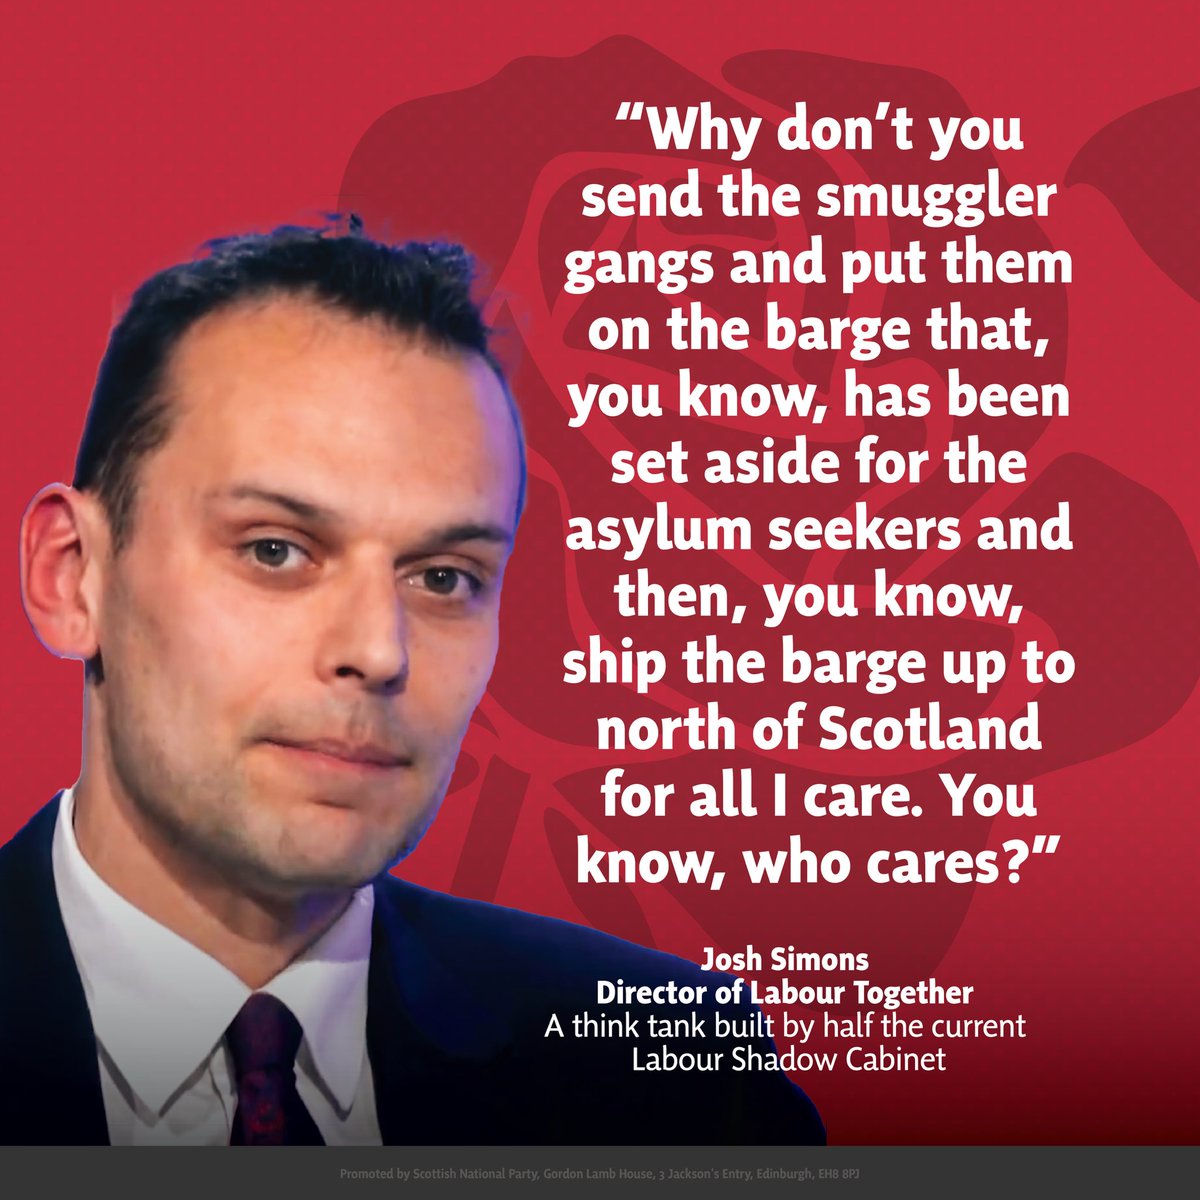 🥀 A Labour think tank built by half the current Labour Shadow Cabinet suggests sending smuggling gangs to Scotland.